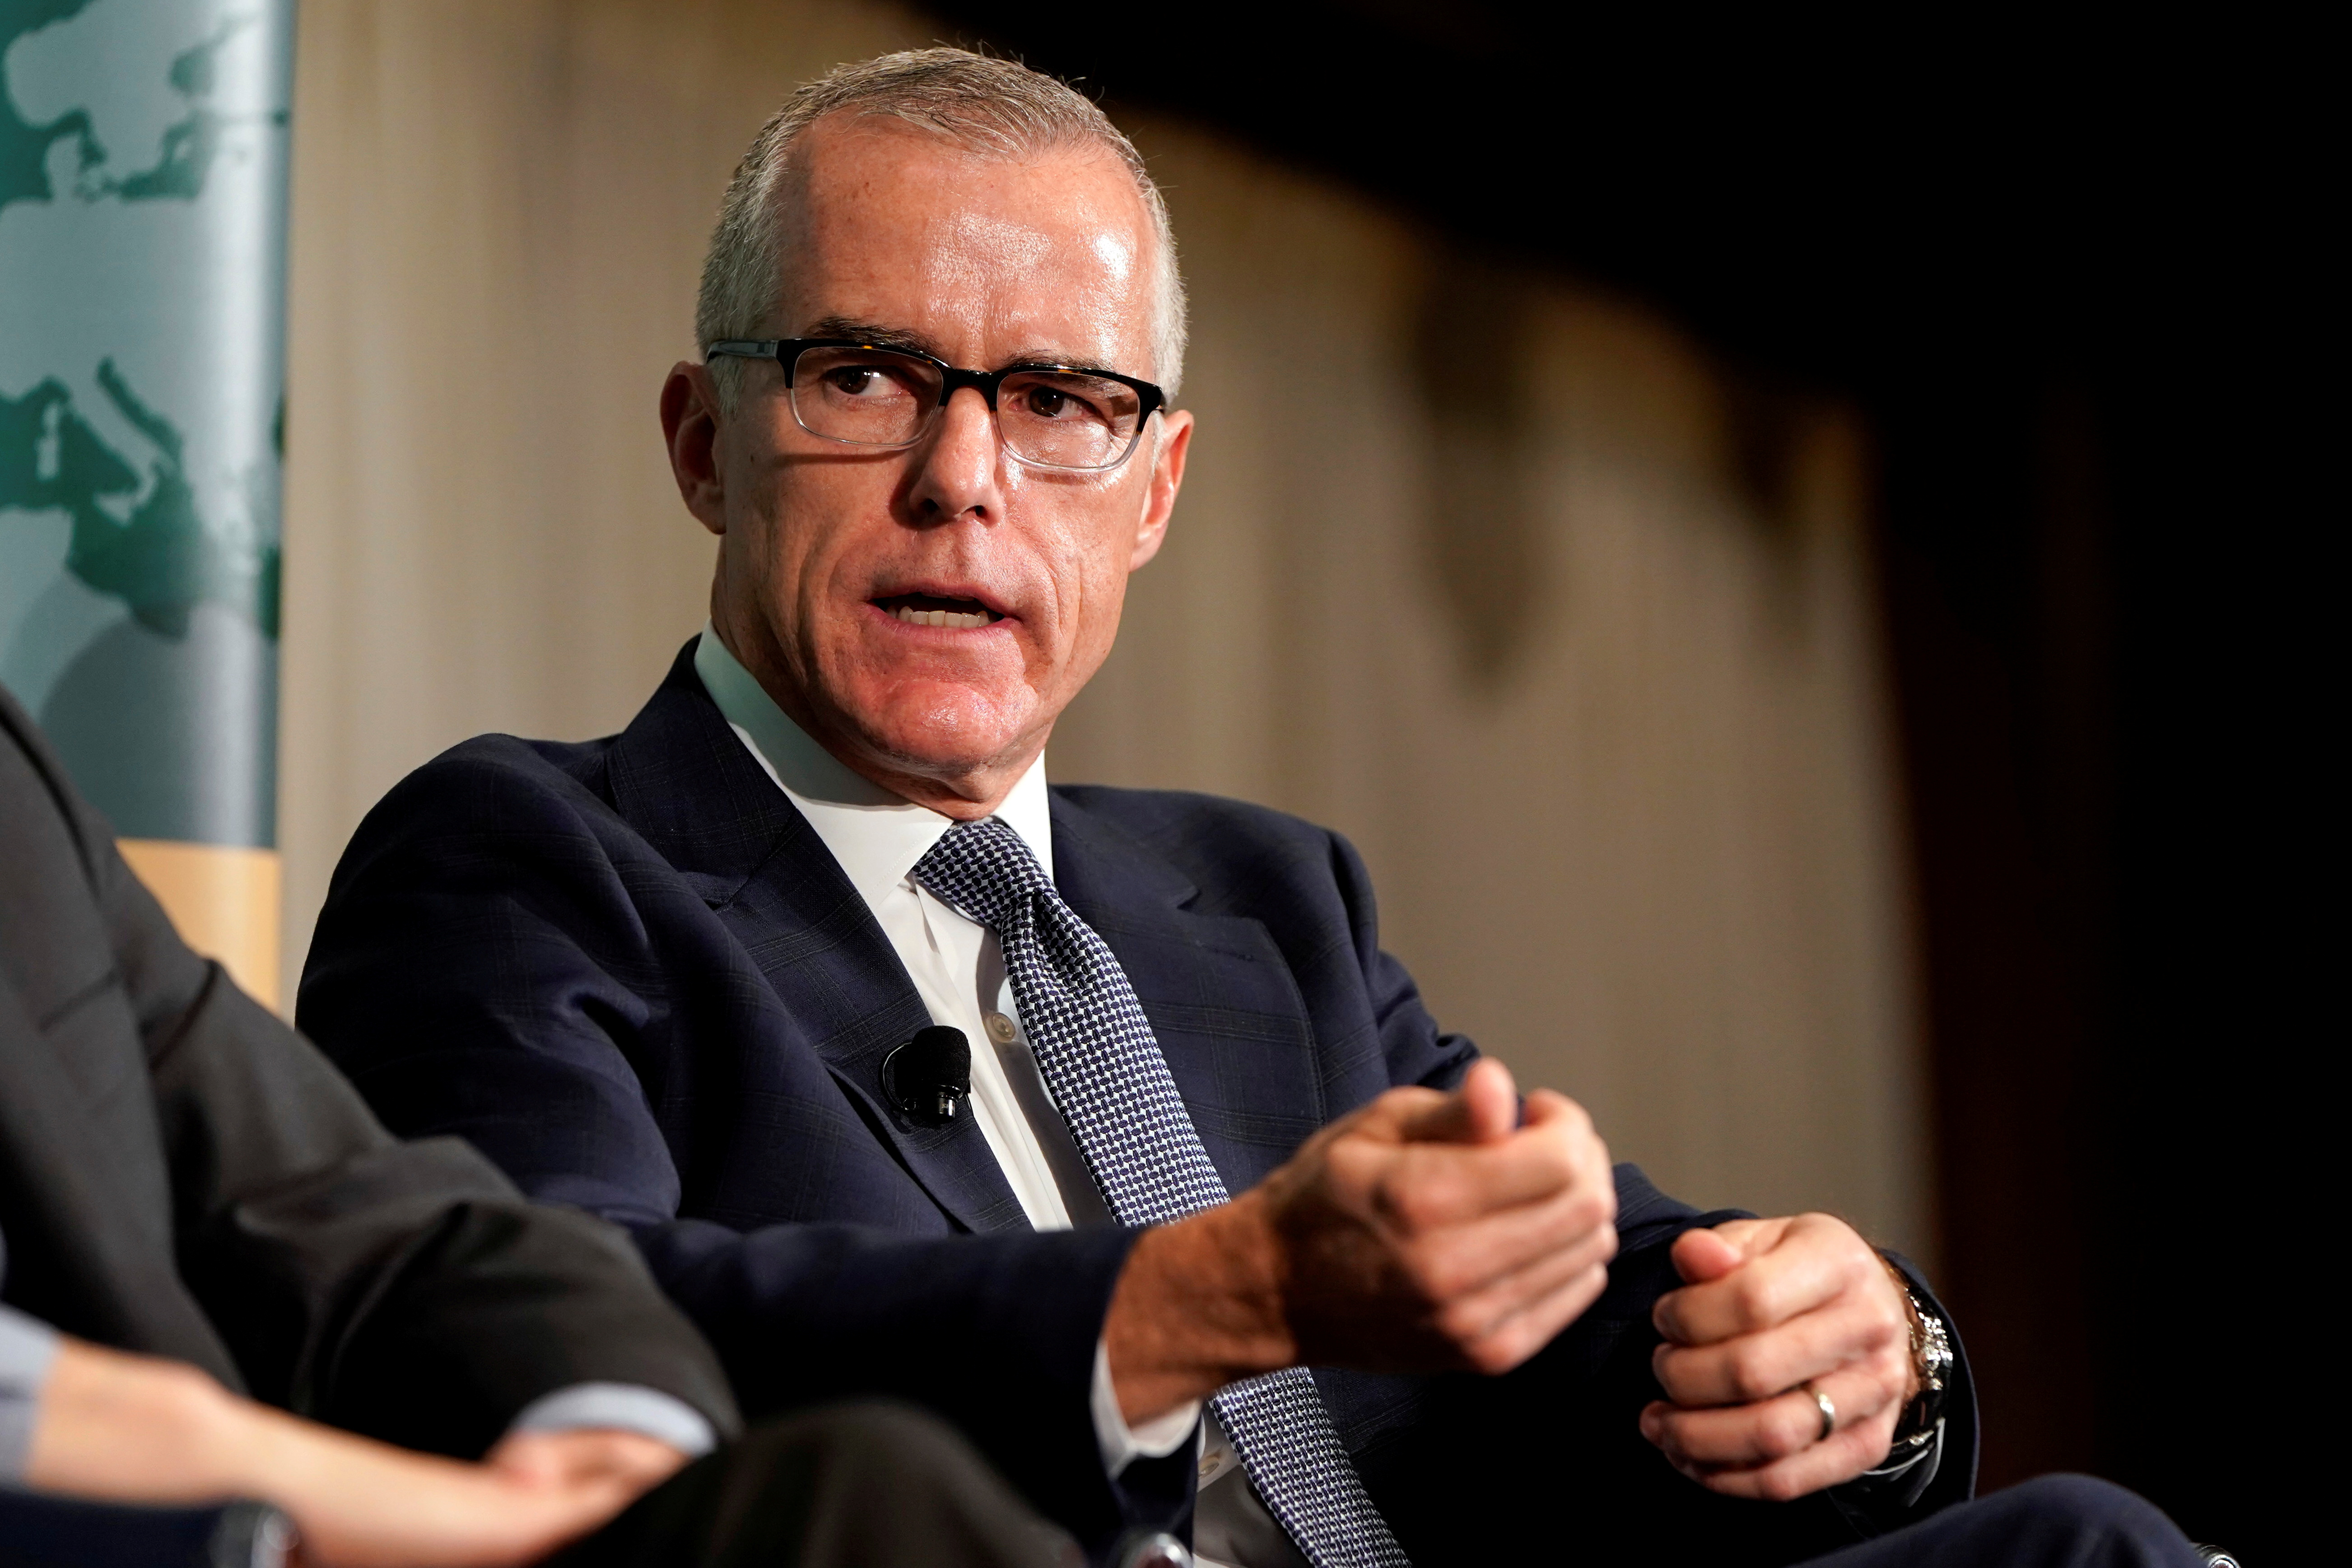 Former acting FBI director Andrew McCabe speaks during a forum on election security in Washington